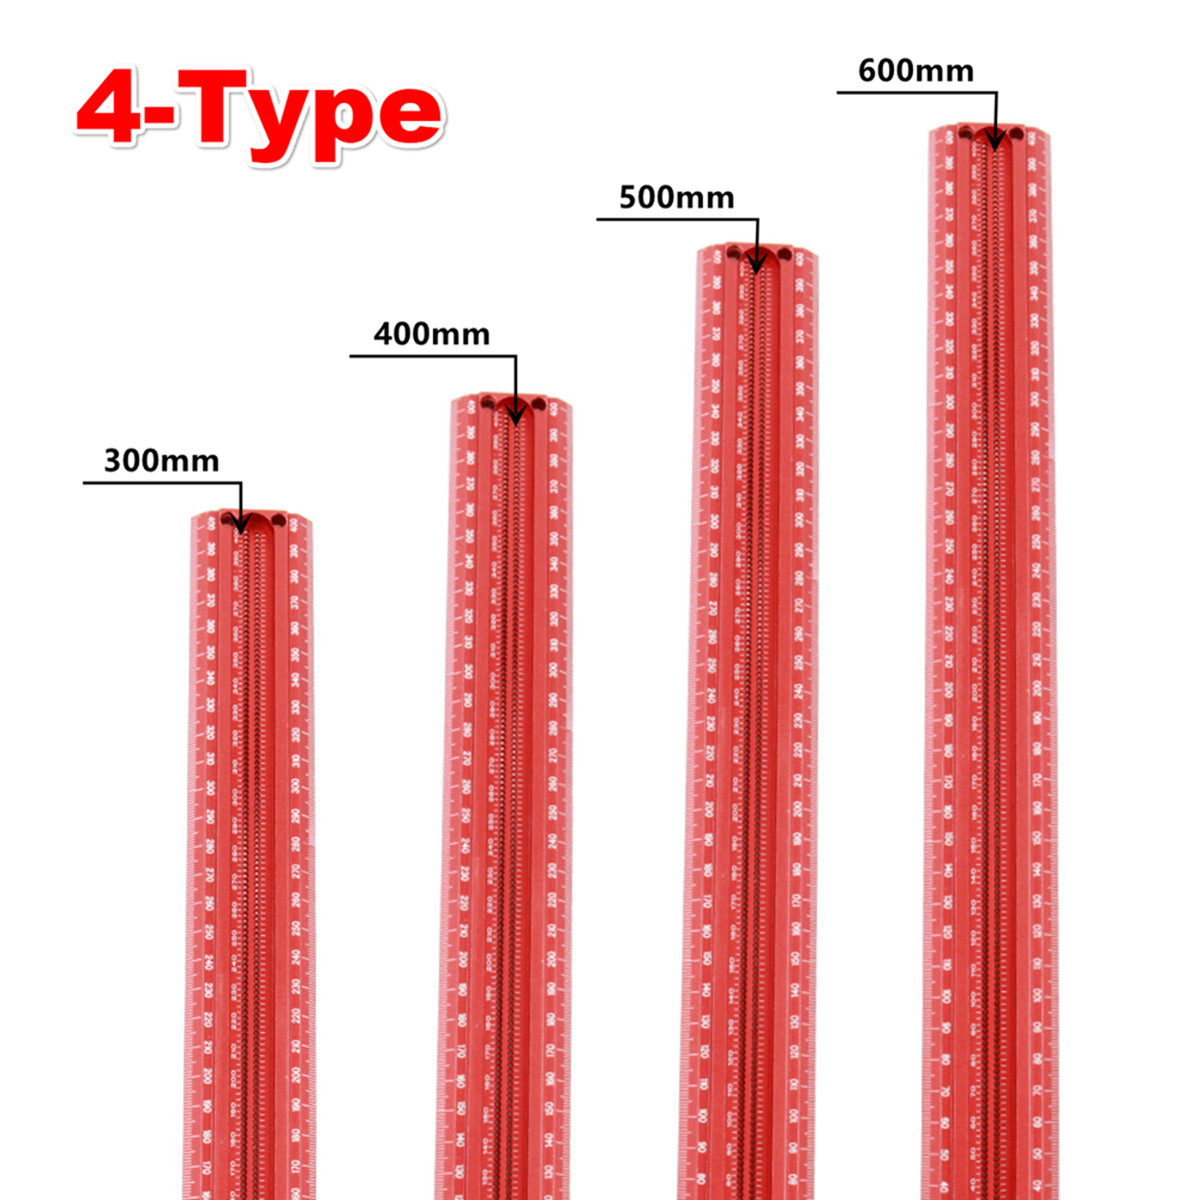 Aluminum-Alloy-Precision-Marking-Ruler-Woodworking-Multifunctional-Scale-Ruler-Hole-Ruler-Woodworkin-1848019-9